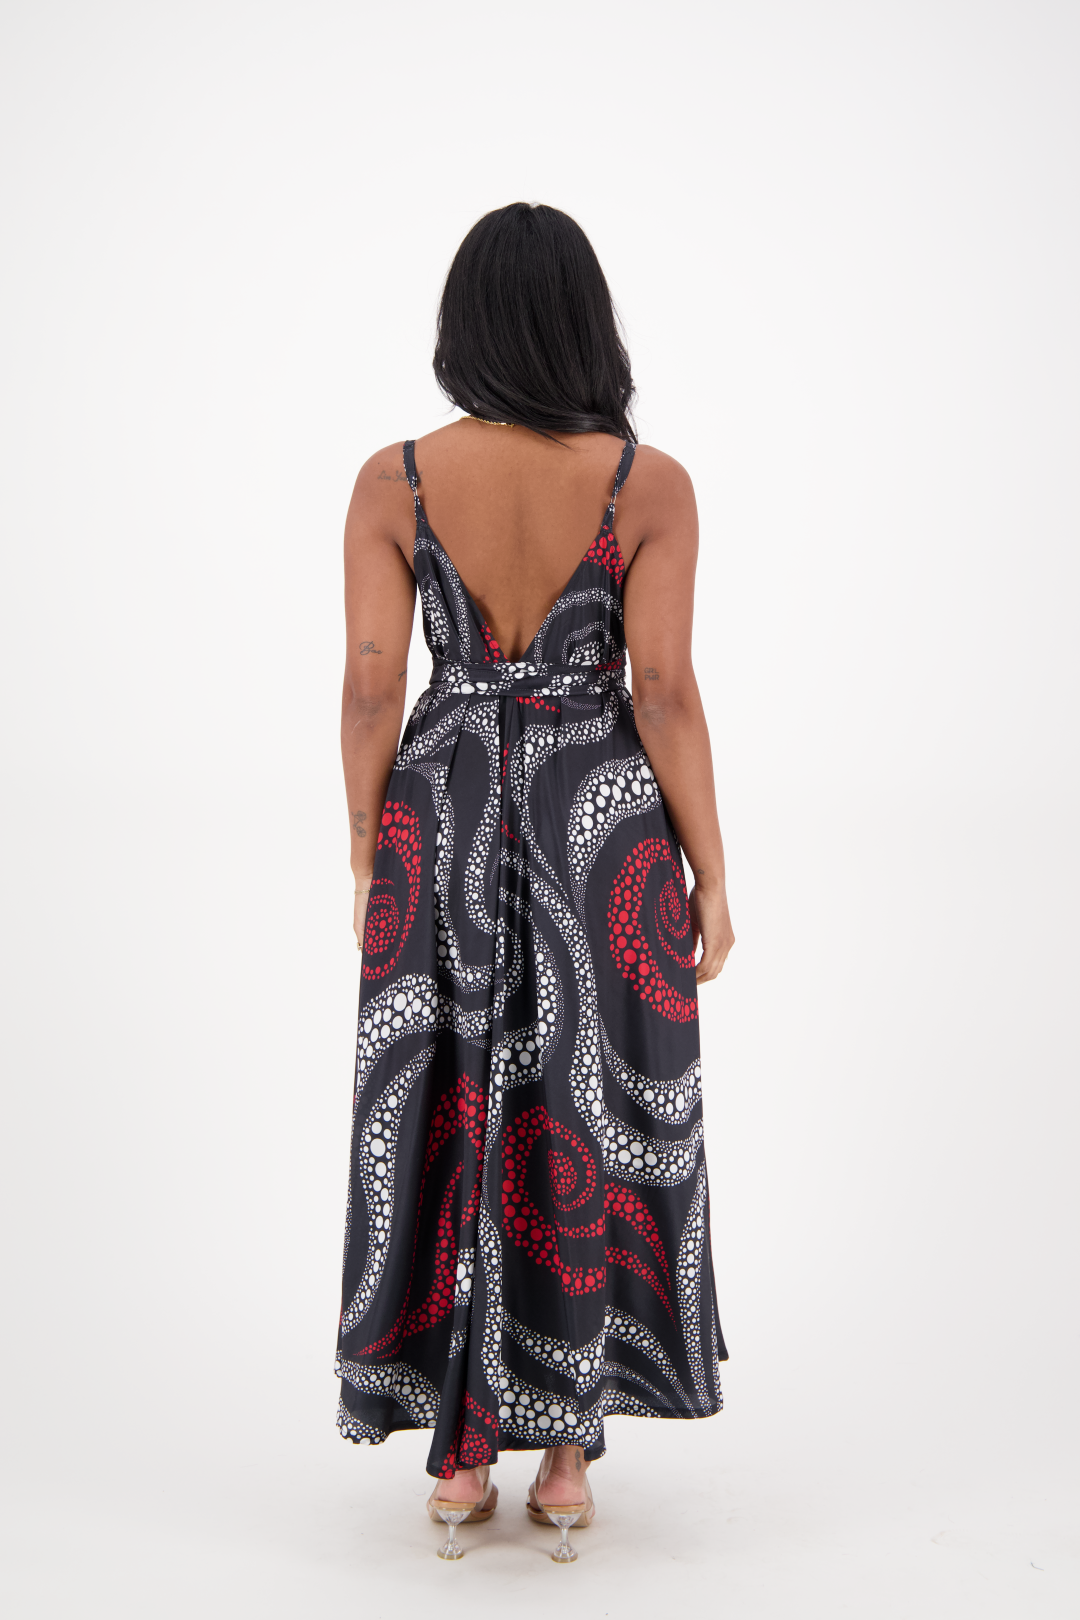 New Arrivals African Fashion